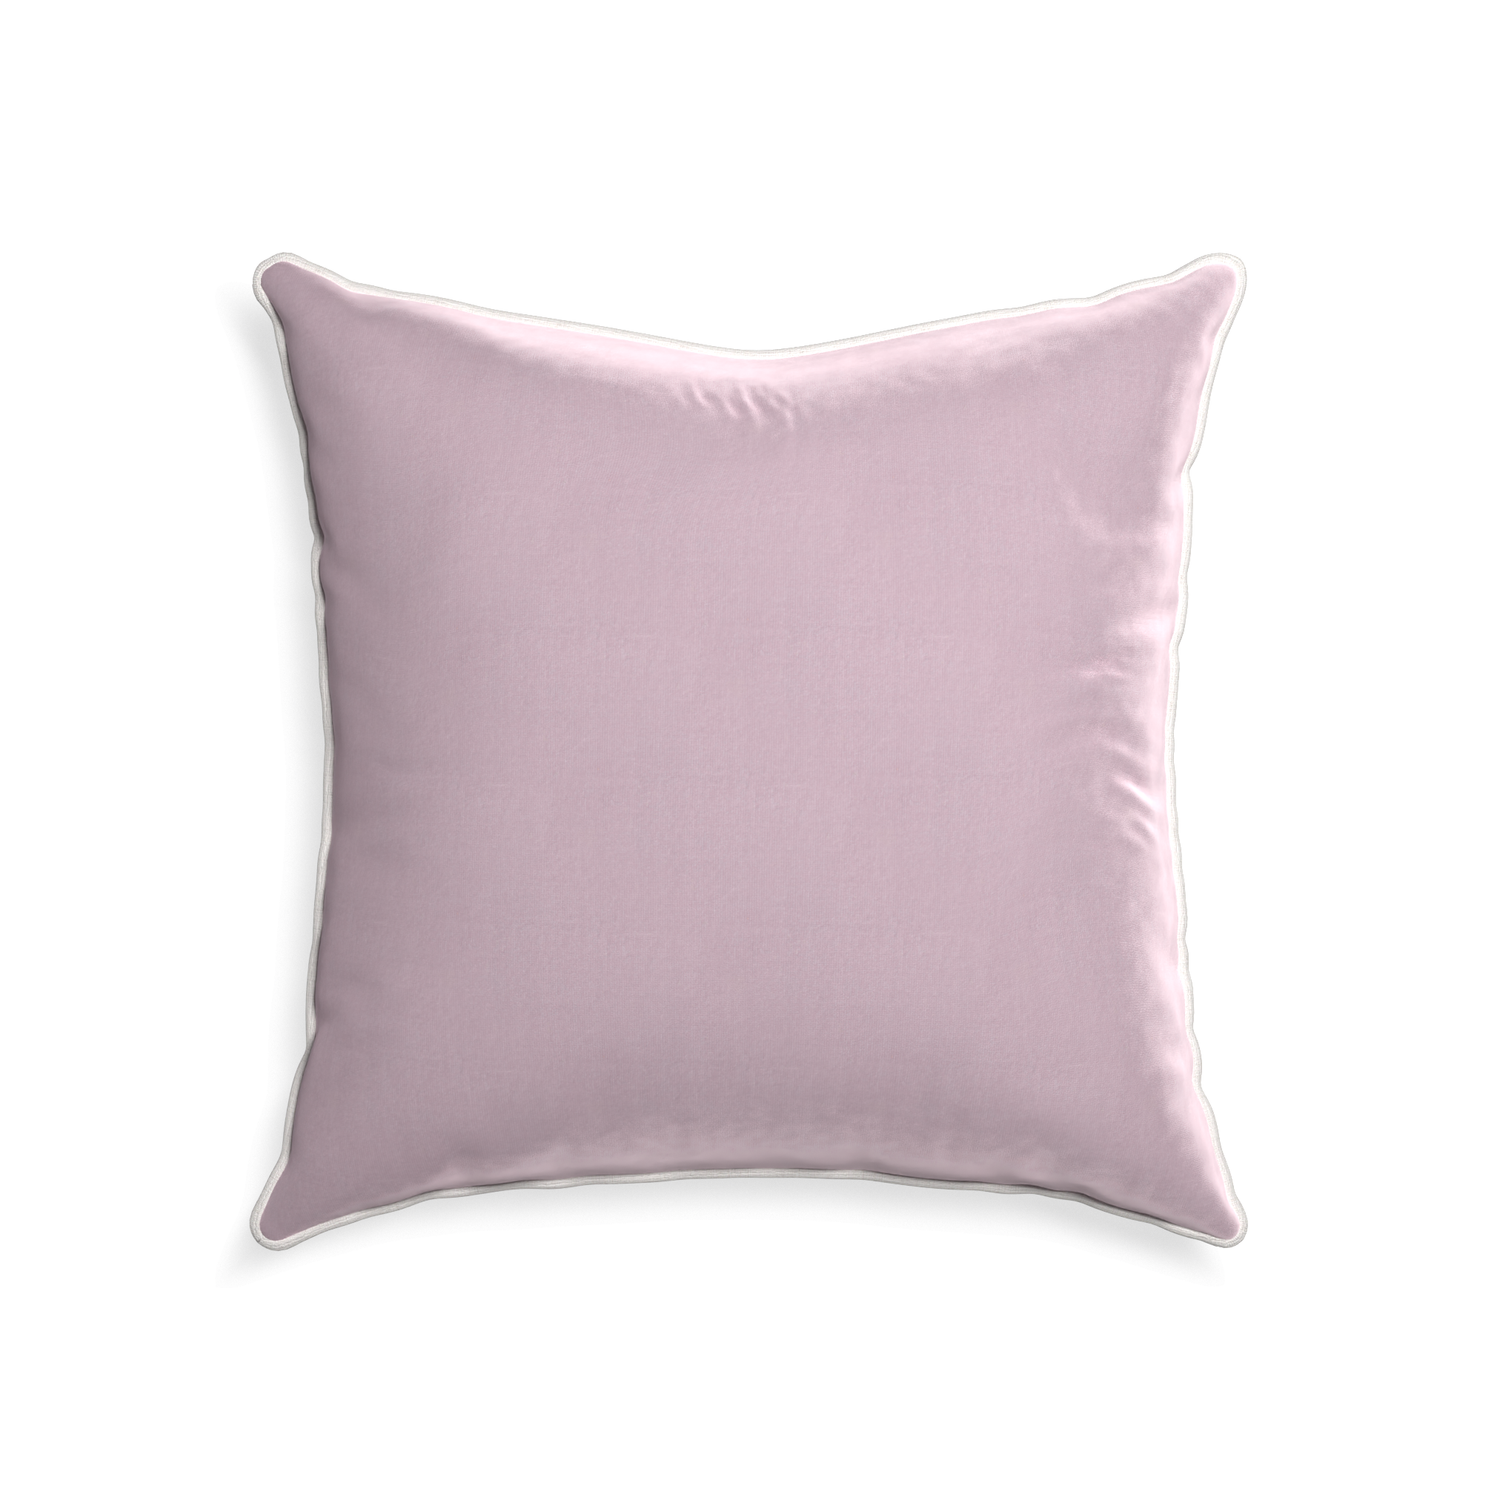 22-square lilac velvet custom pillow with snow piping on white background